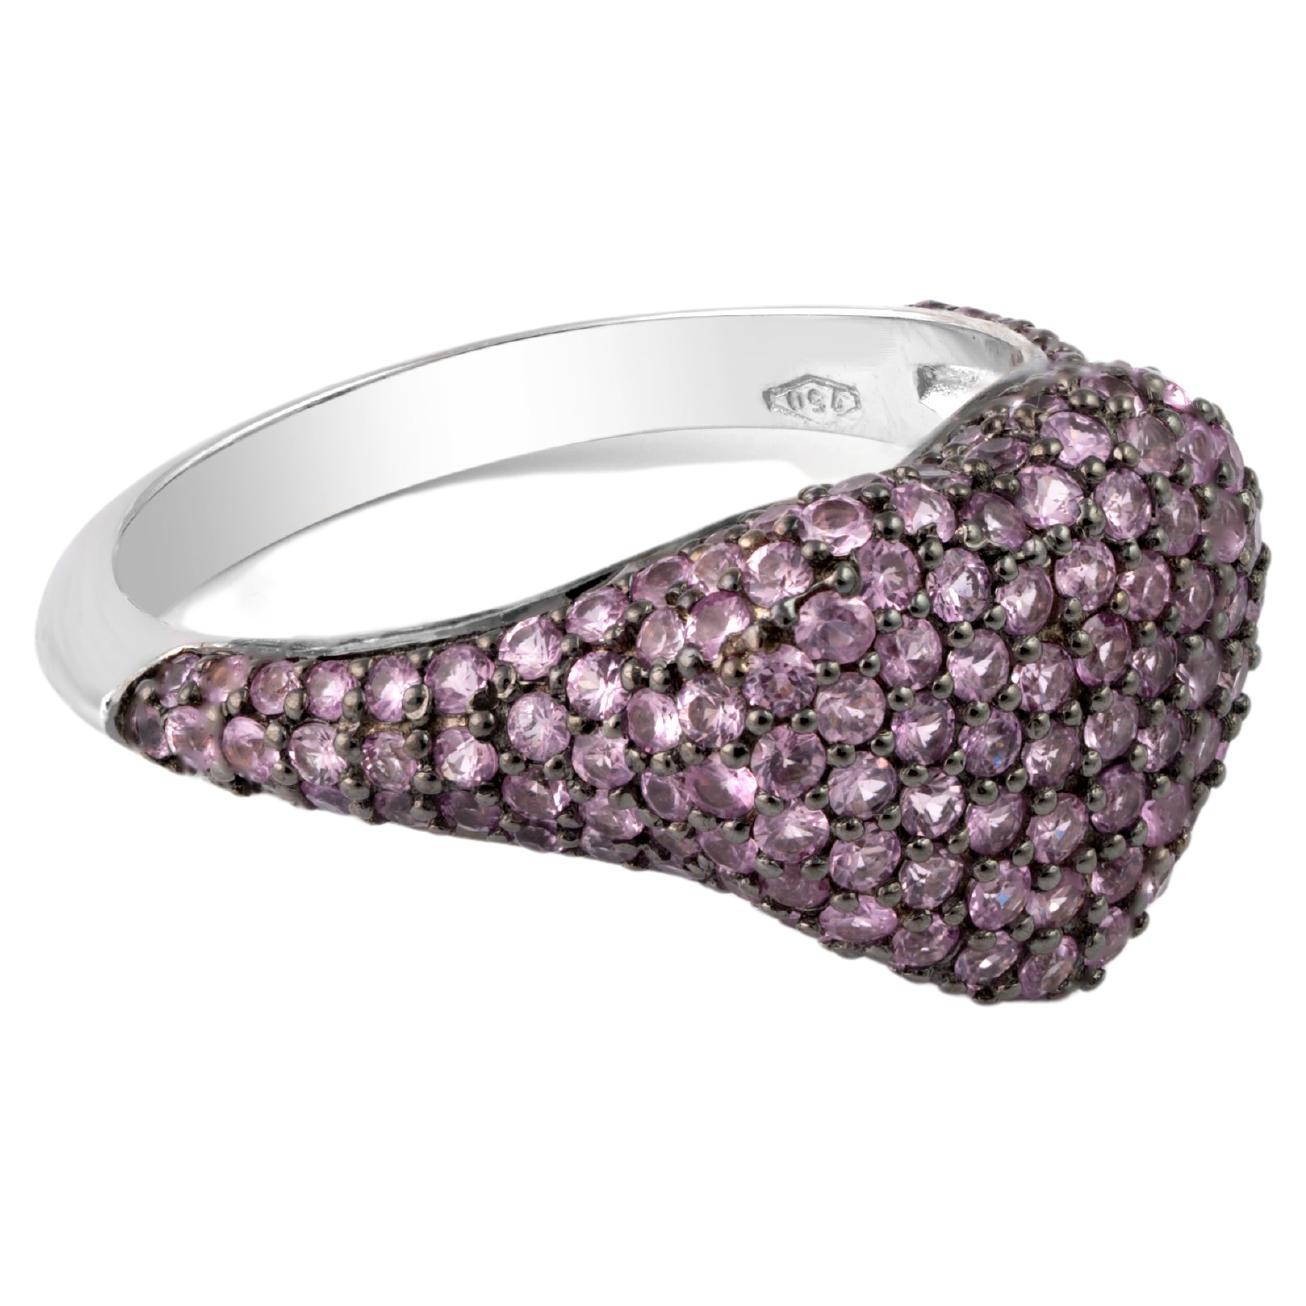 Natural Pink Sapphire 2.06cts in 18k Gold 3.96gms Ring